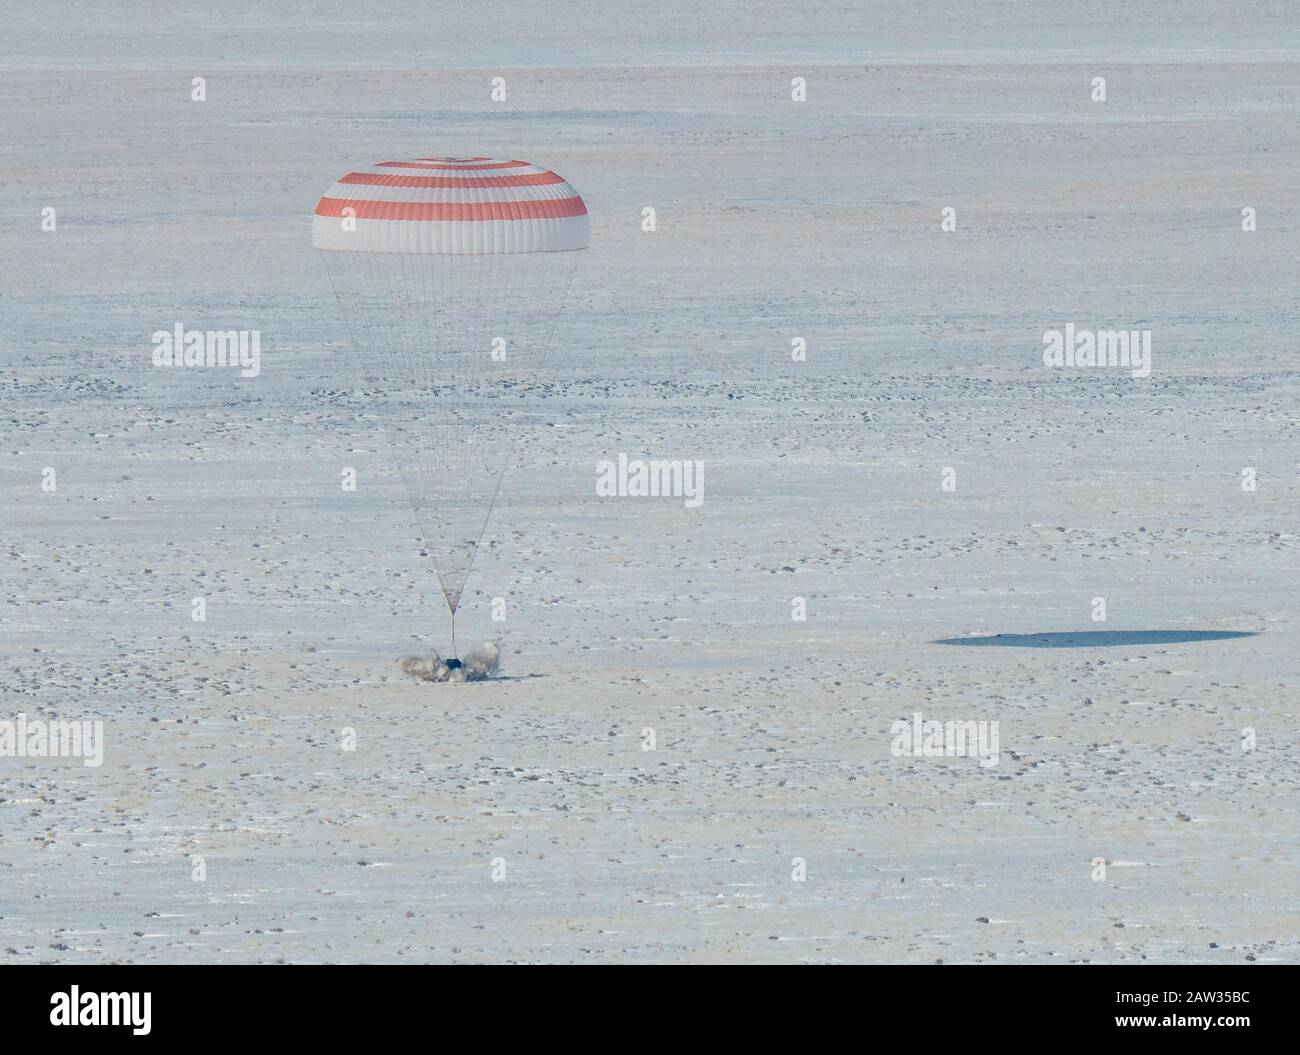 The Soyuz MS-13 spacecraft is seen as it lands in a remote area near the town of Zhezkazgan, Kazakhstan with Expedition 61 crew members Christina Koch of NASA, Alexander Skvortsov of the Russian space agency Roscosmos, and Luca Parmitano of ESA (European Space Agency) Thursday, Feb. 6, 2020. Koch returned to Earth after logging 328 days in space --- the longest spaceflight in history by a woman --- as a member of Expeditions 59-60-61 on the International Space Station. Skvortsov and Parmitano returned after 201 days in space where they served as Expedition 60-61 crew members onboard the statio Stock Photo